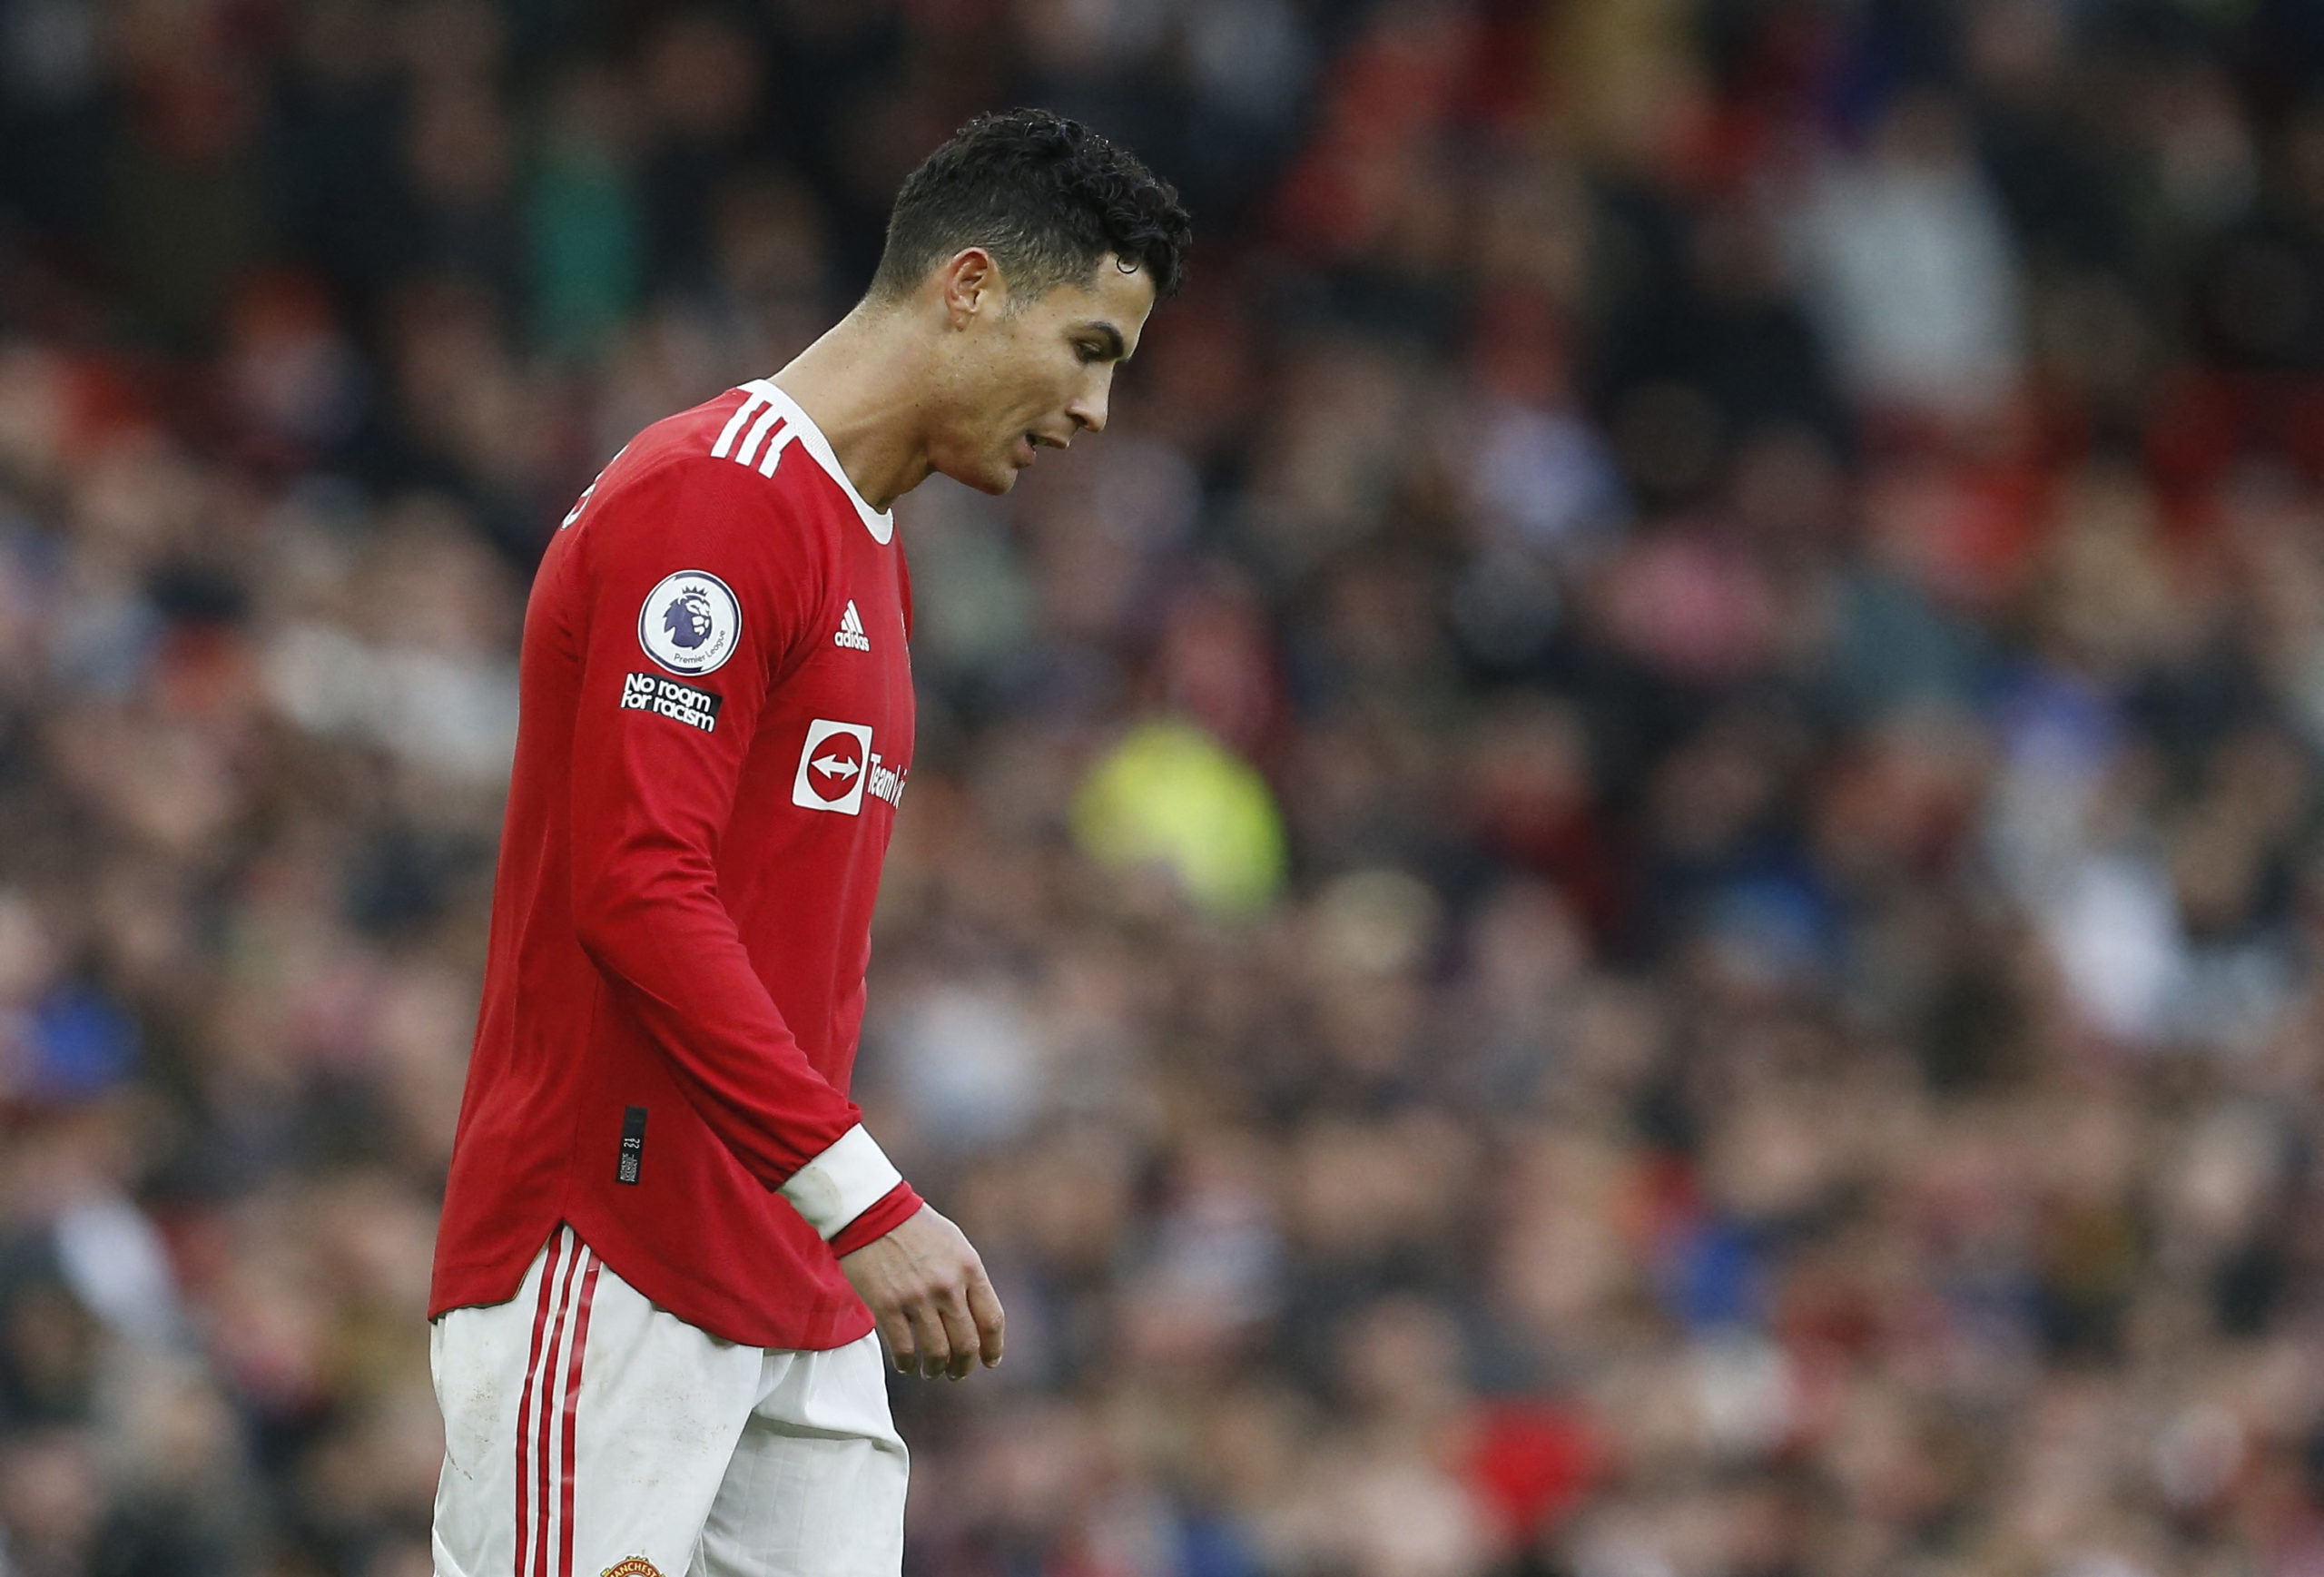 Soccer Football - Premier League - Manchester United v Watford - Old Trafford, Manchester, Britain - February 26, 2022 Manchester United's Cristiano Ronaldo reacts